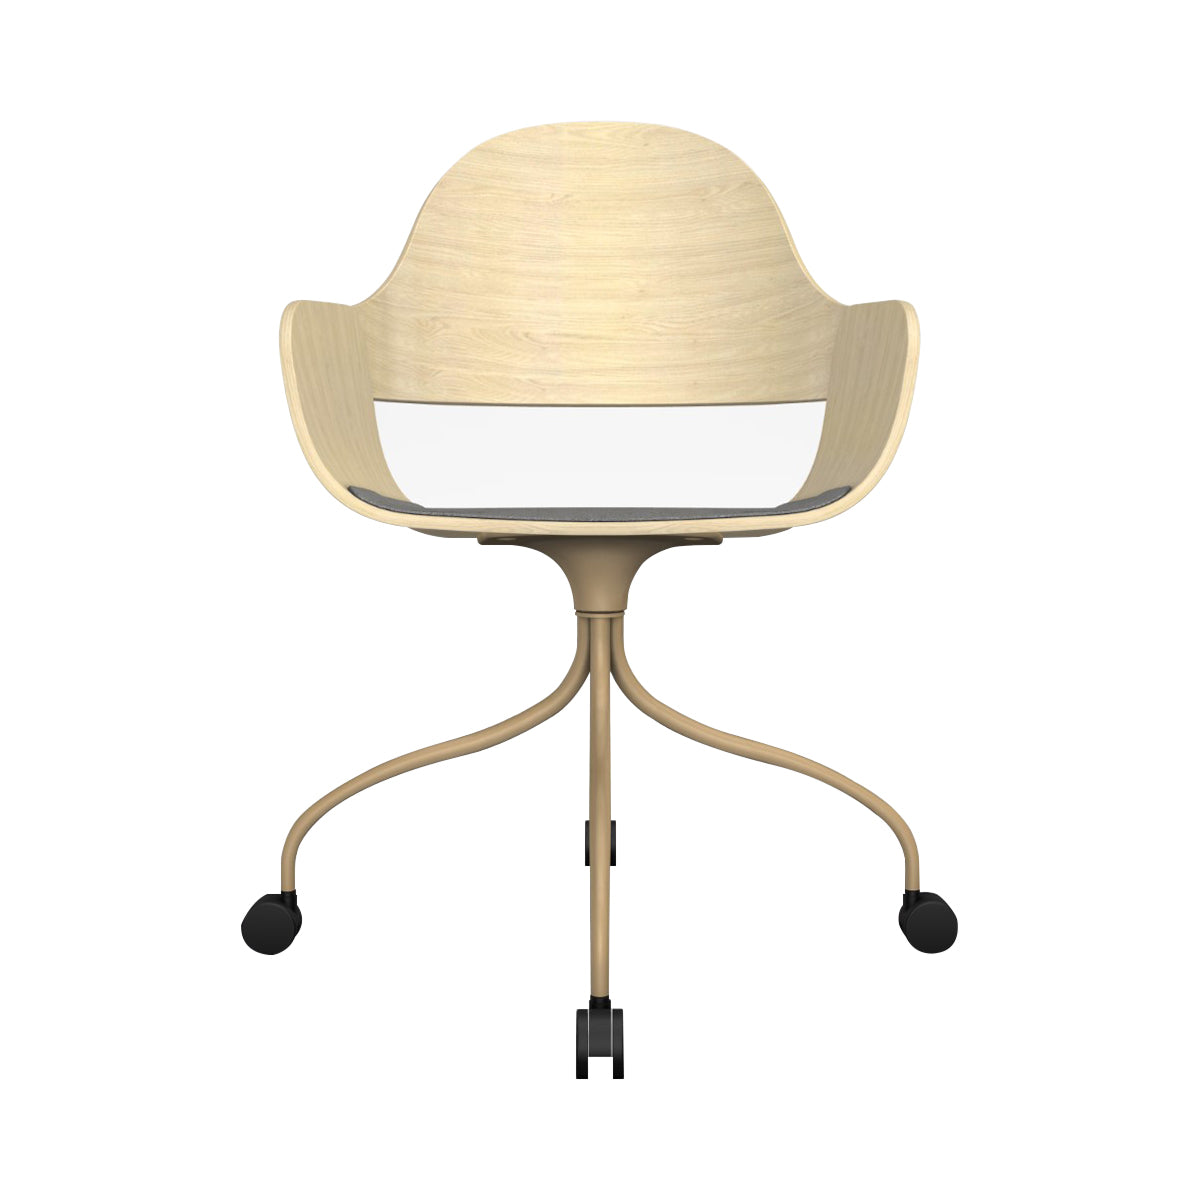 Showtime Nude Chair with Wheel: Seat Upholstered + Natural Ash + Beige